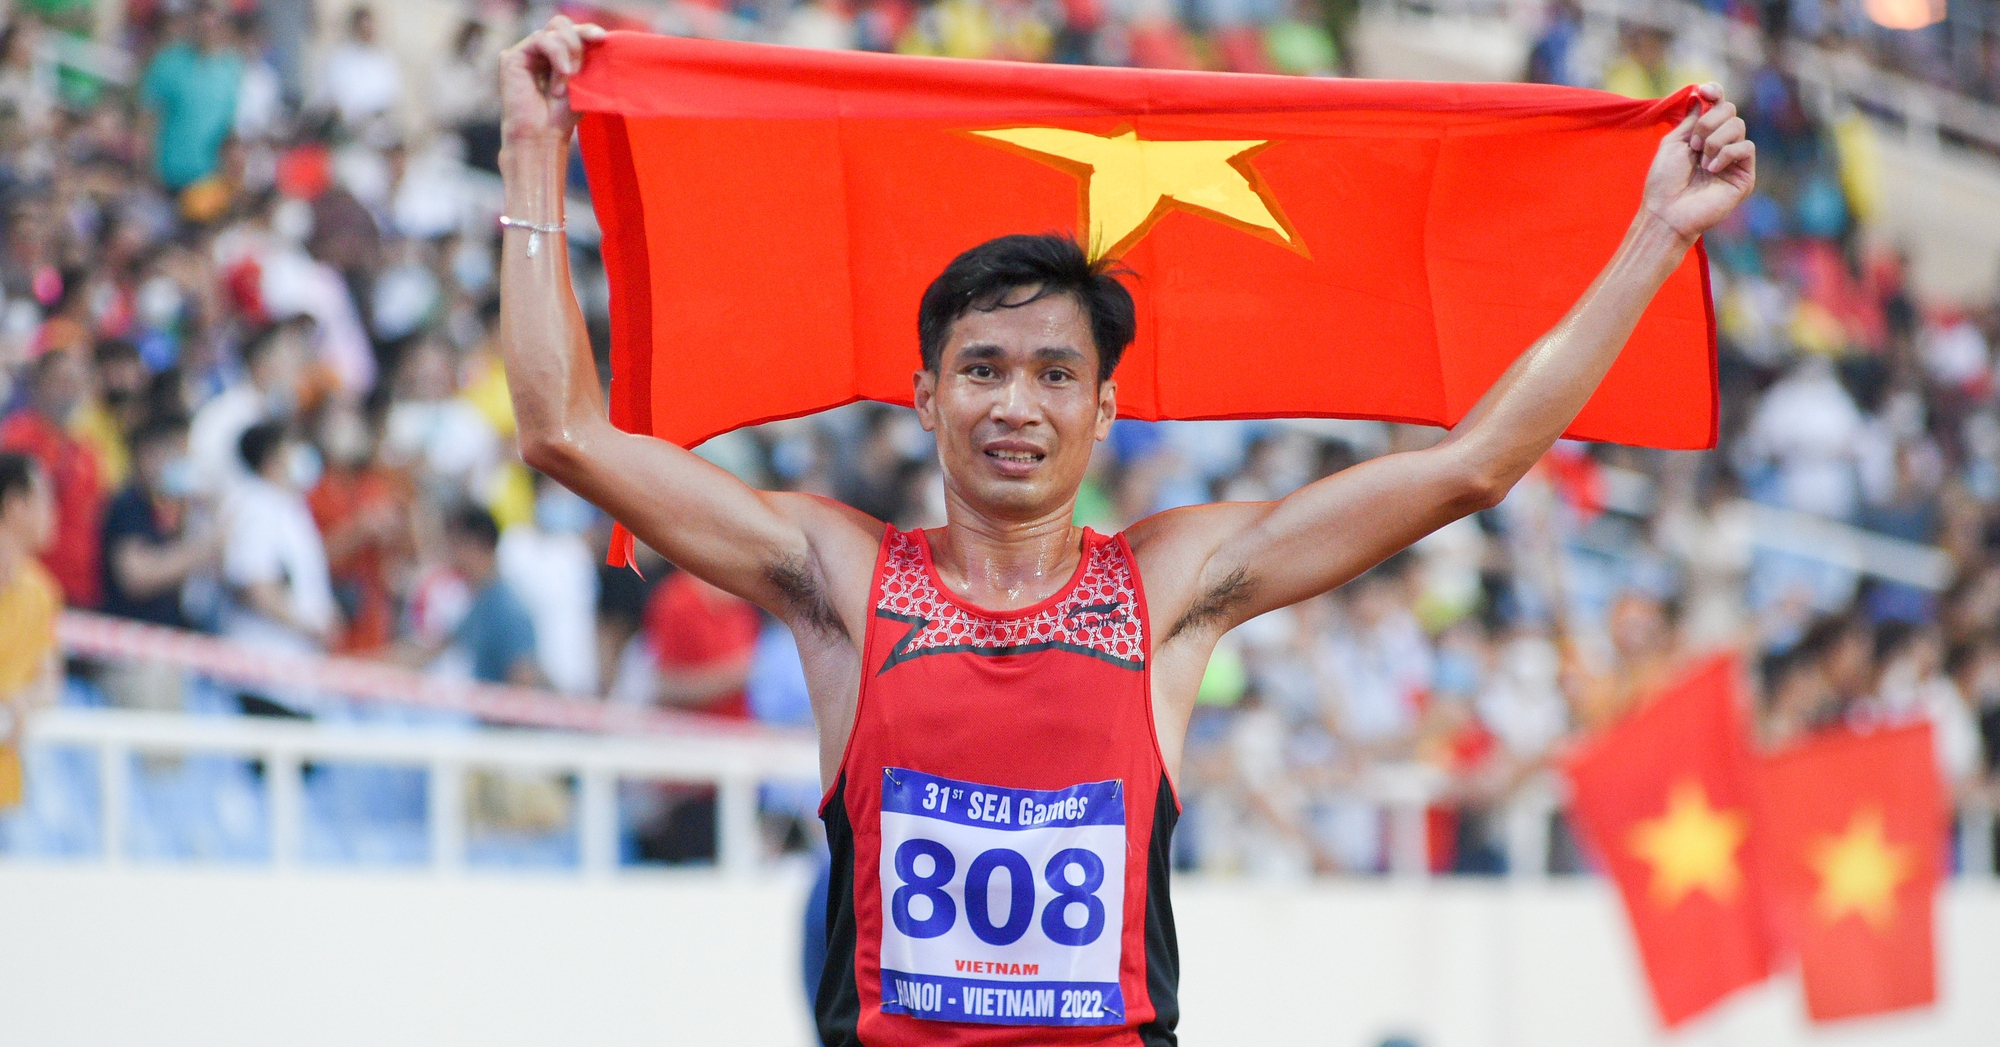 At the age of 36, Nguyen Van Lai still scored a double gold medal in the toughest events in athletics